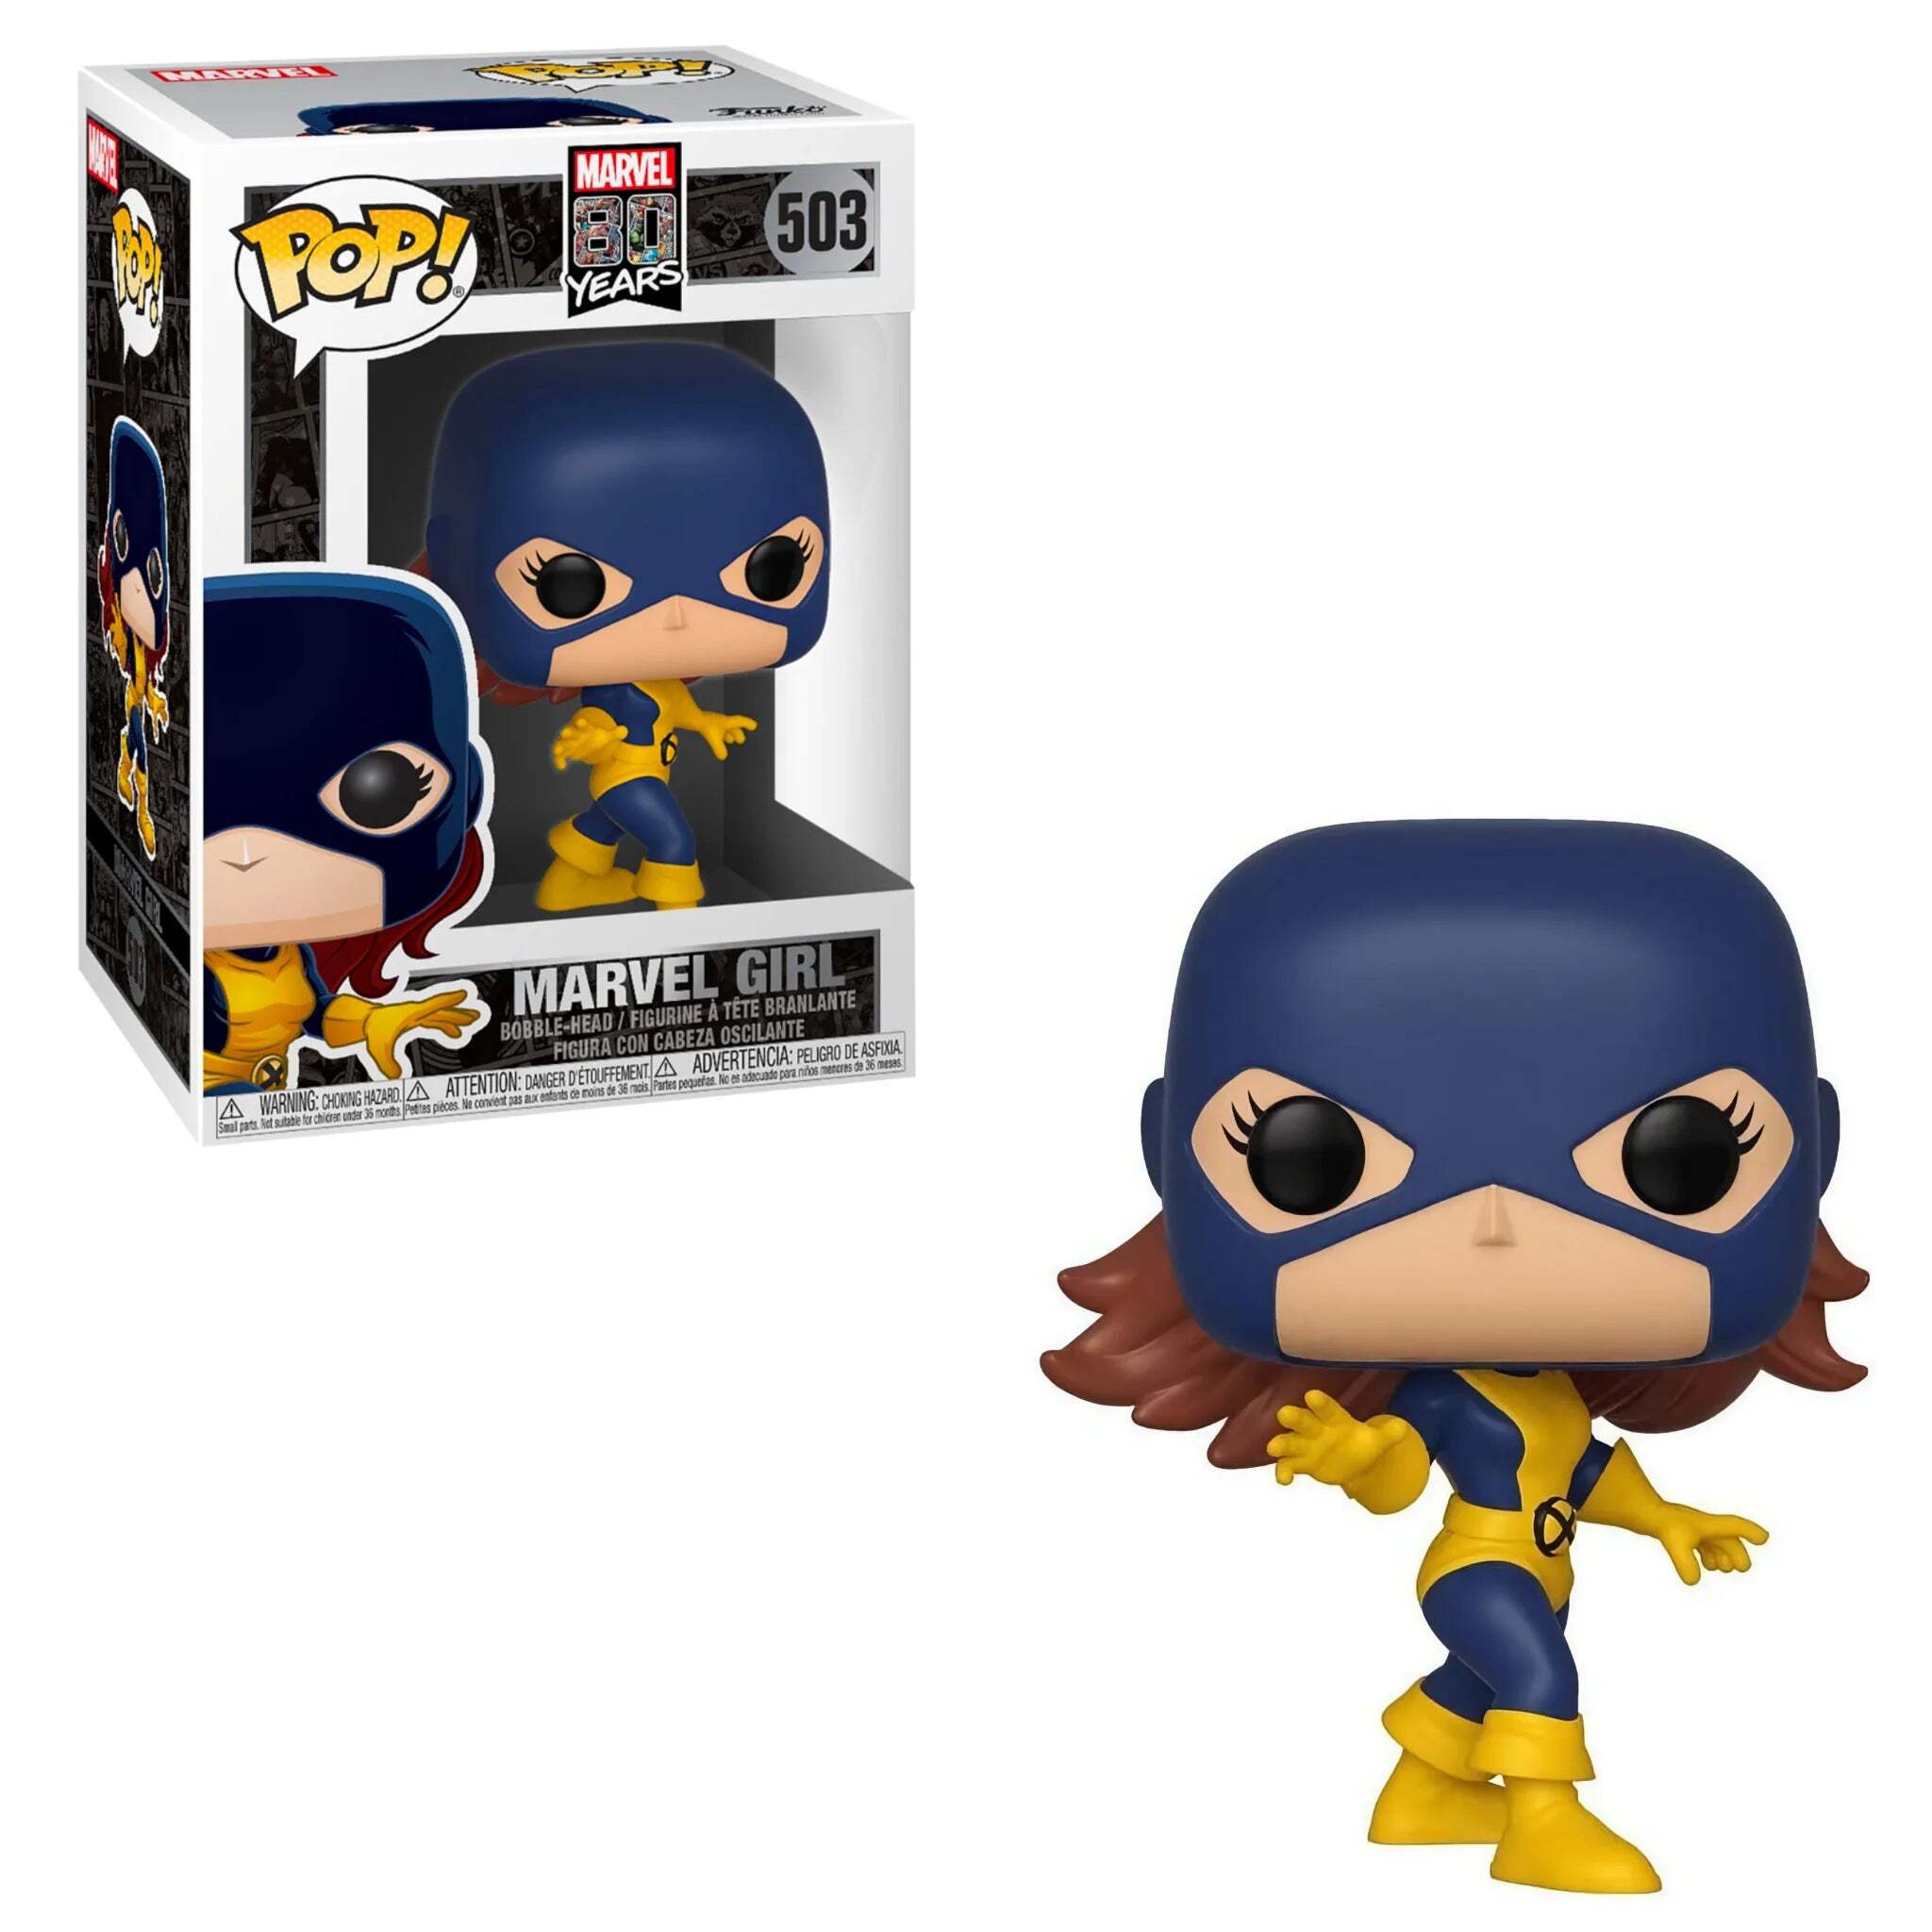 Marvel Girl (First Appearance) Funko Pop!